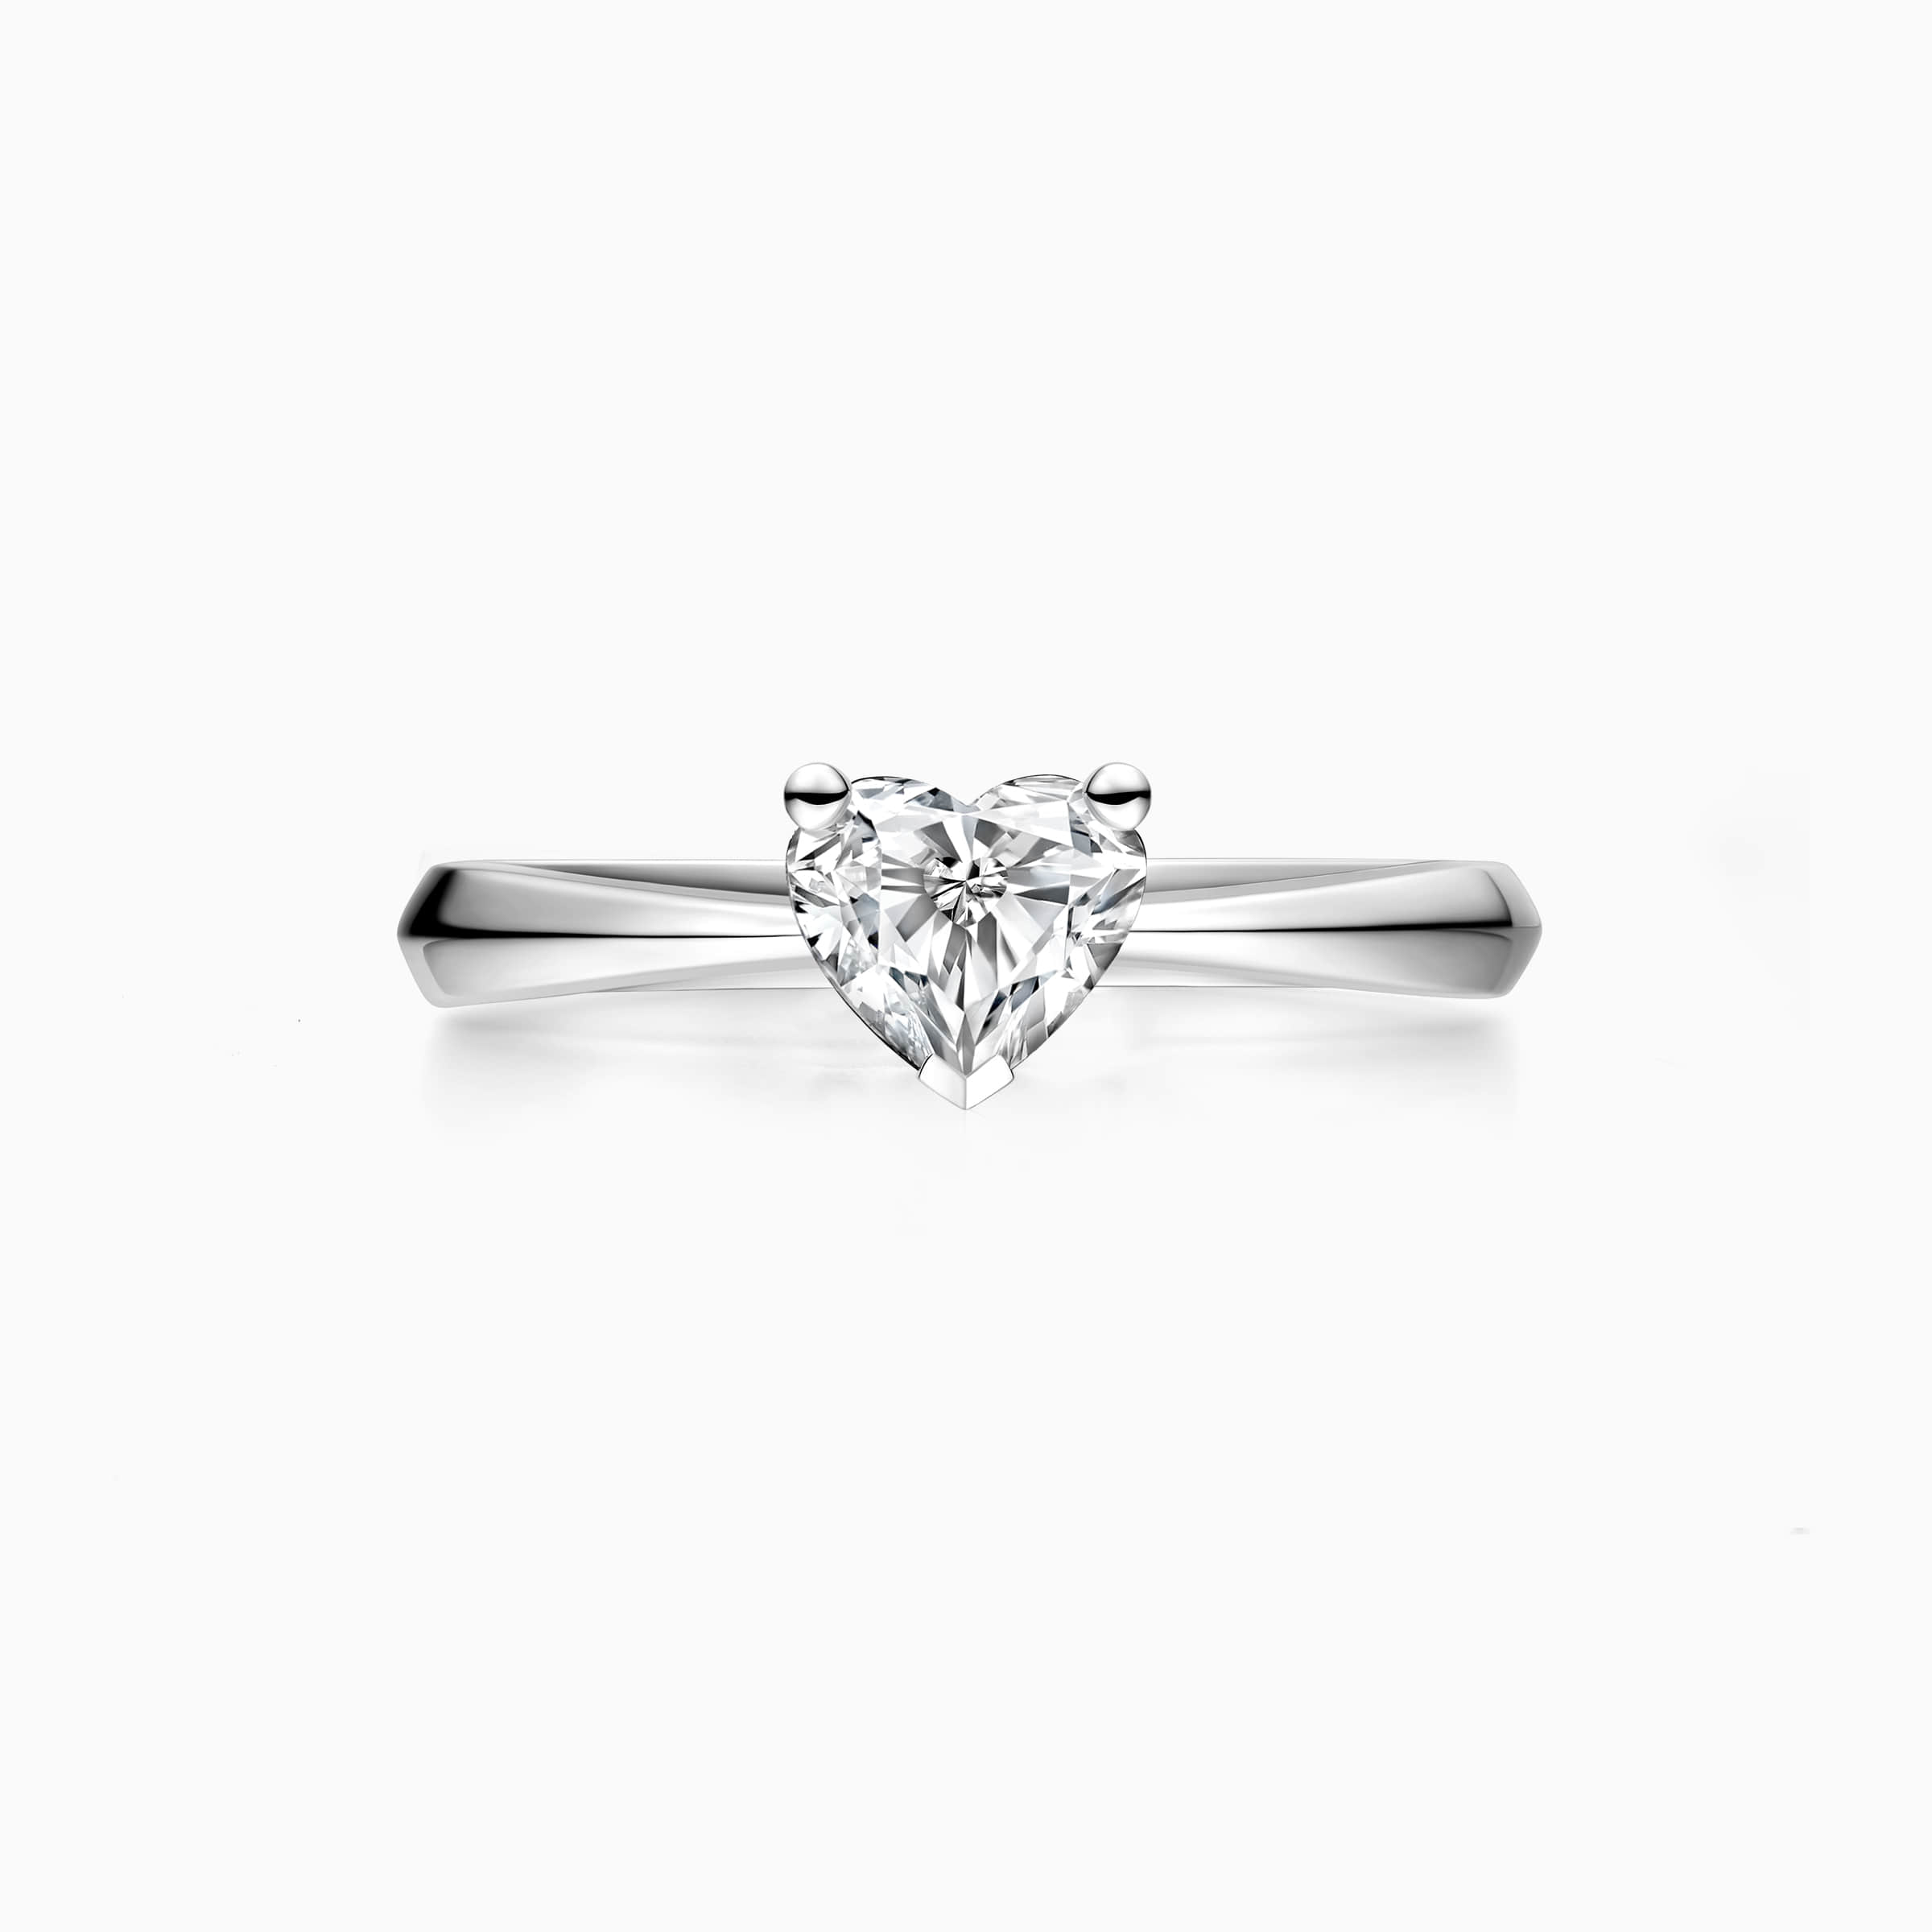 darry ring heart shaped solitaire diamond engagement ring front view